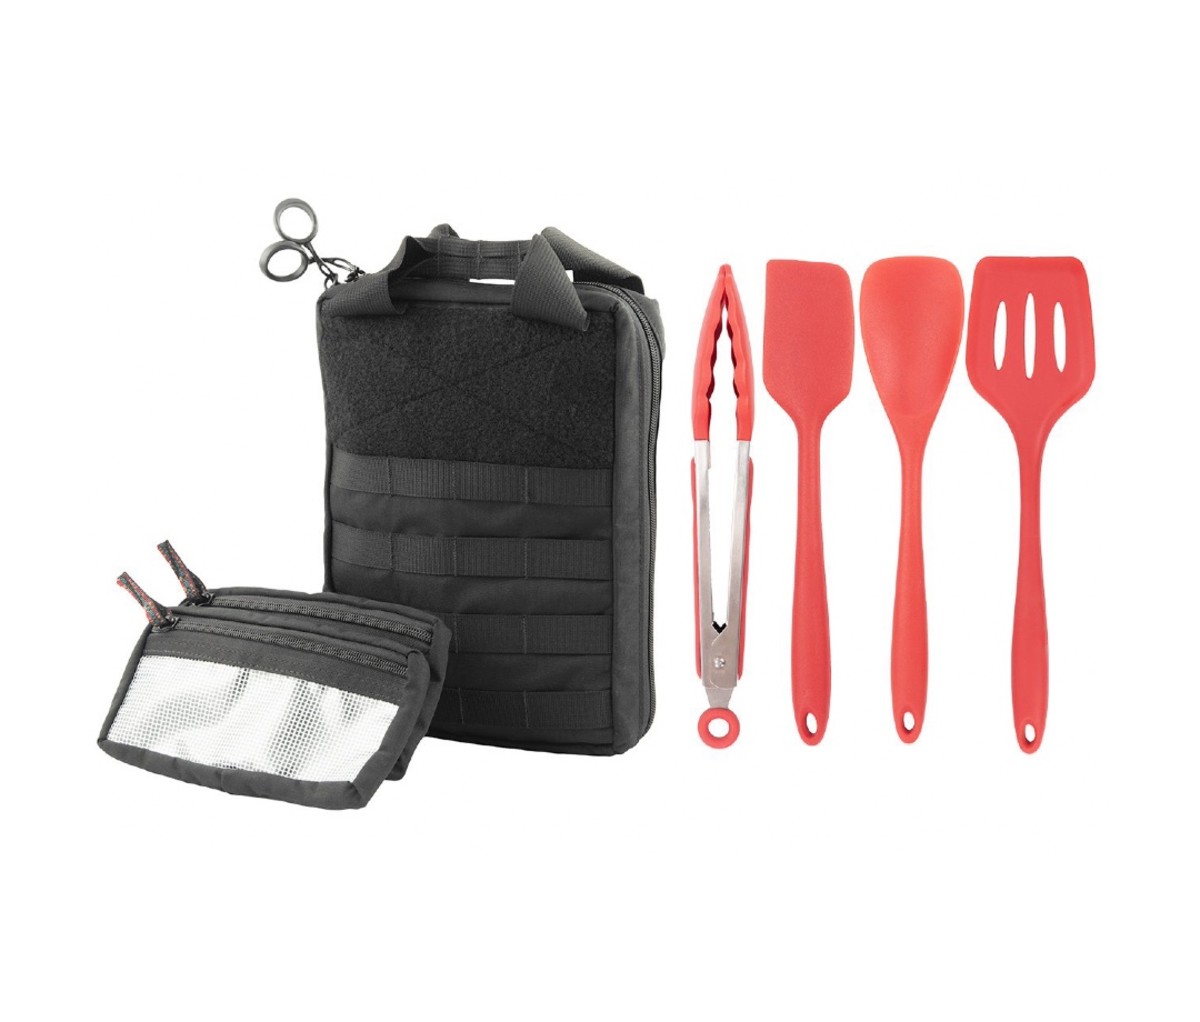 Pick up any of these outdoor kitchen essentials to make your next overlanding trip a gourmet affair.